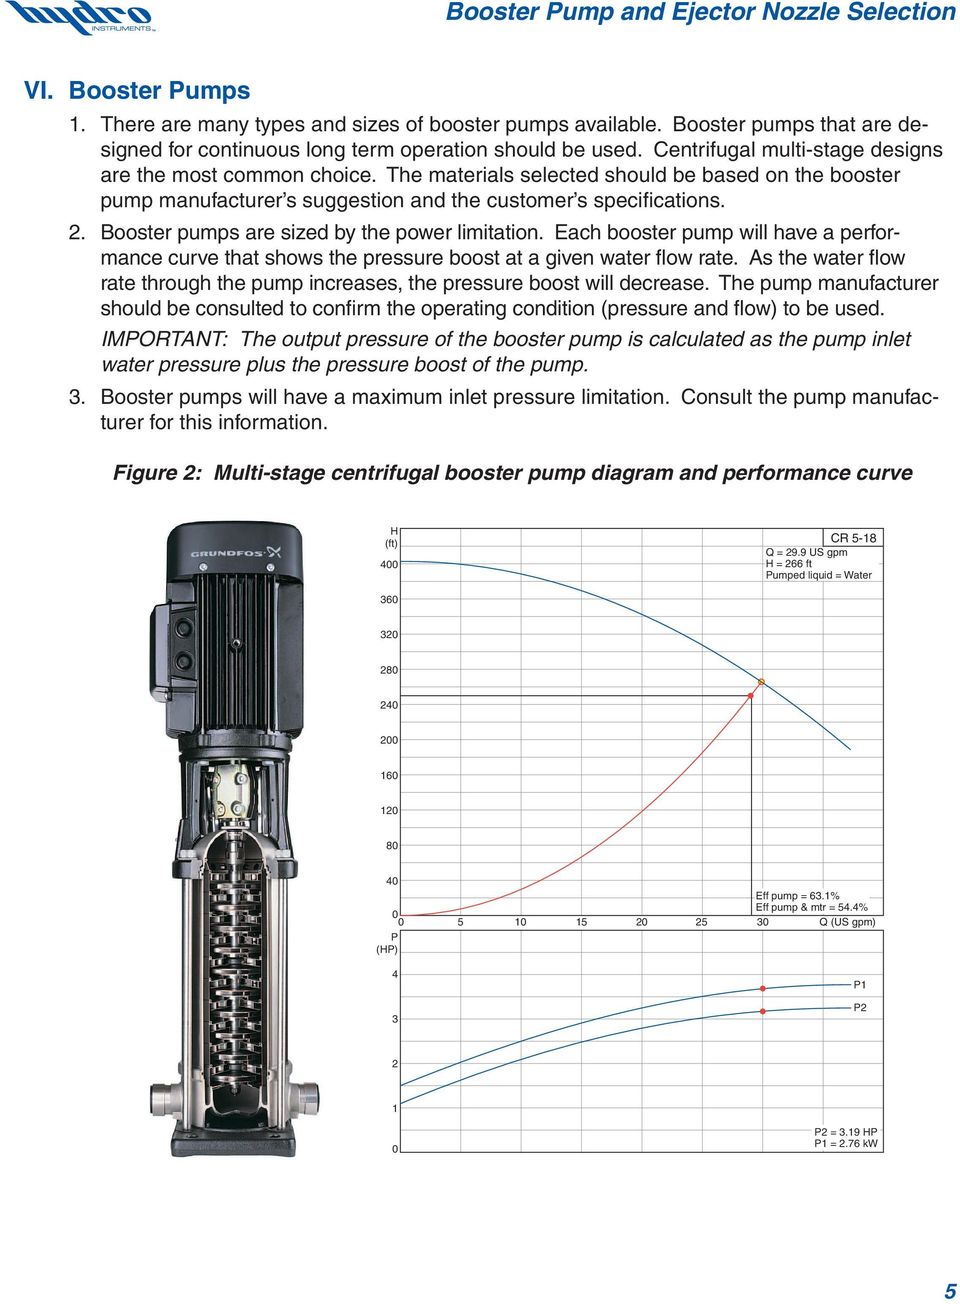 . Booster pumps are sized by the power limitation. Each booster pump will have a performance curve that shows the pressure boost at a given water flow rate.